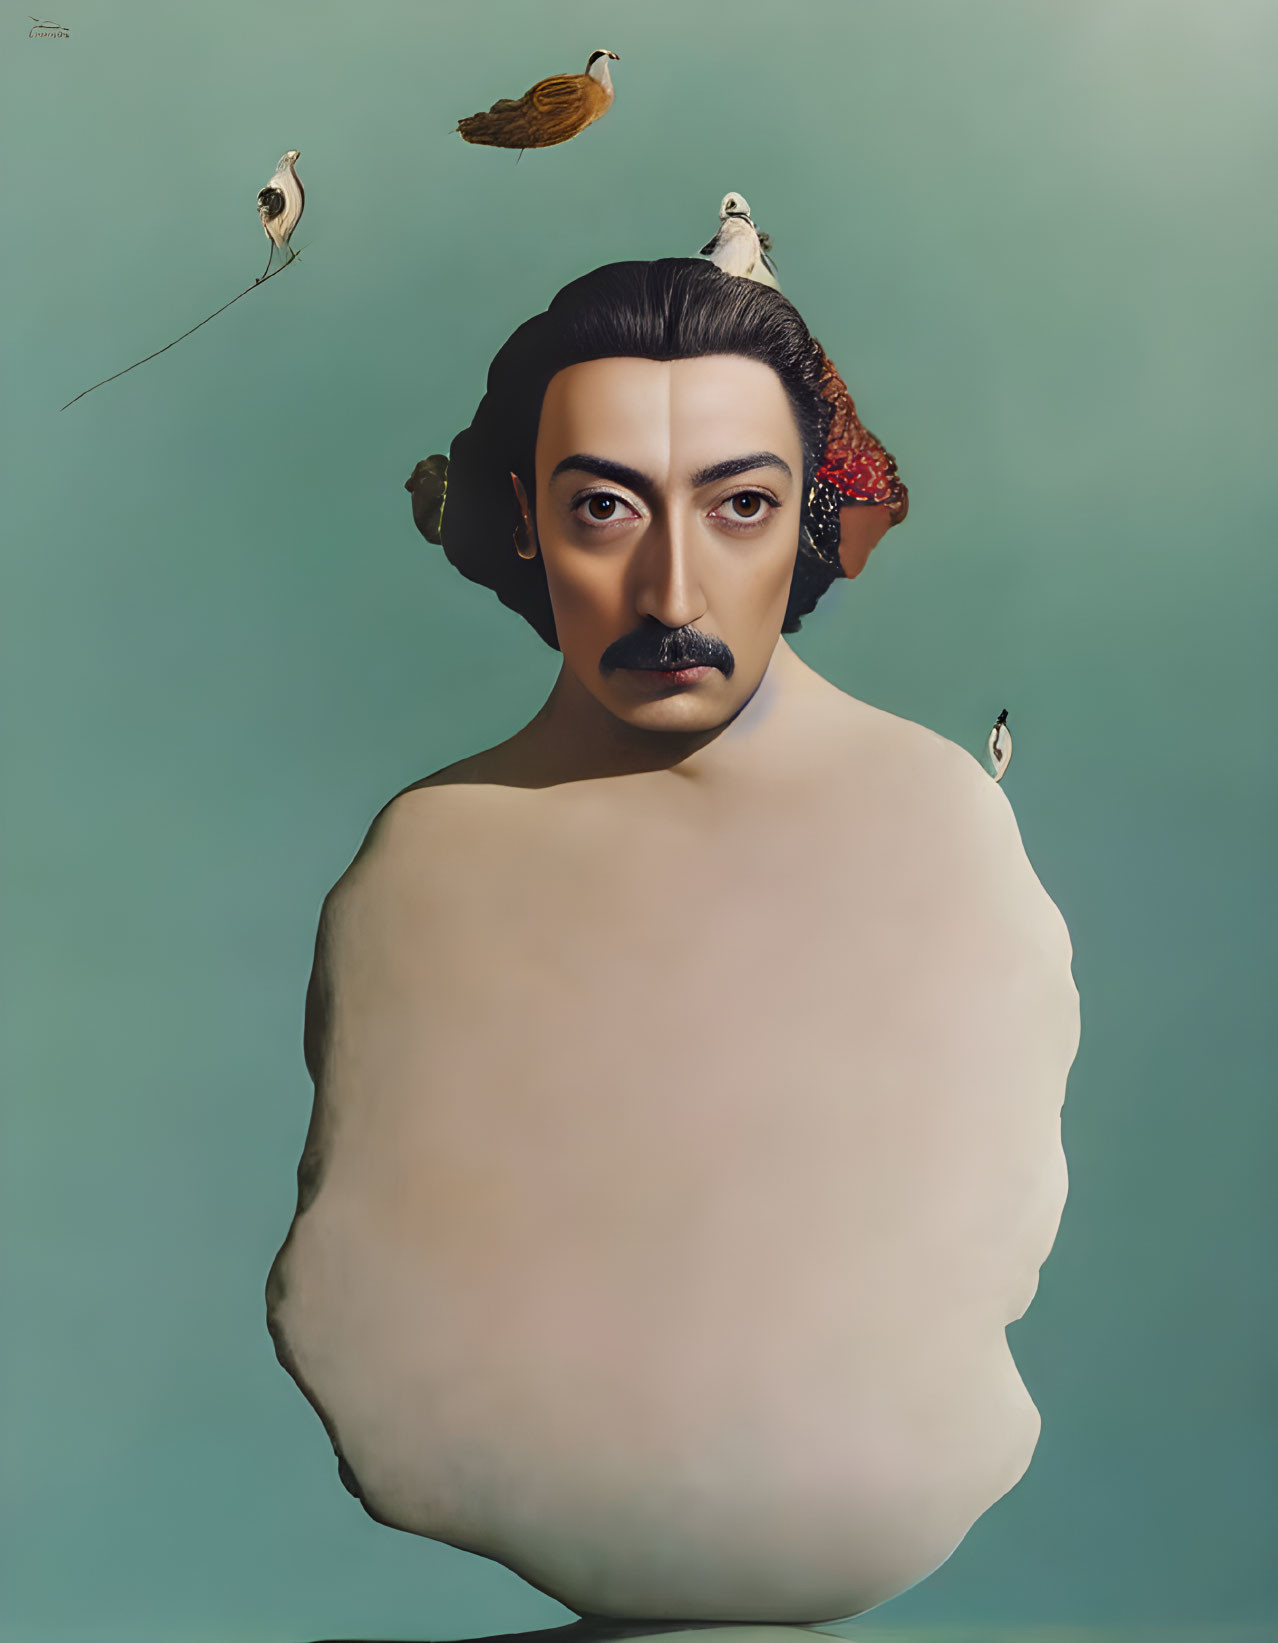 Egg-shaped body surreal portrait with birds and mustache